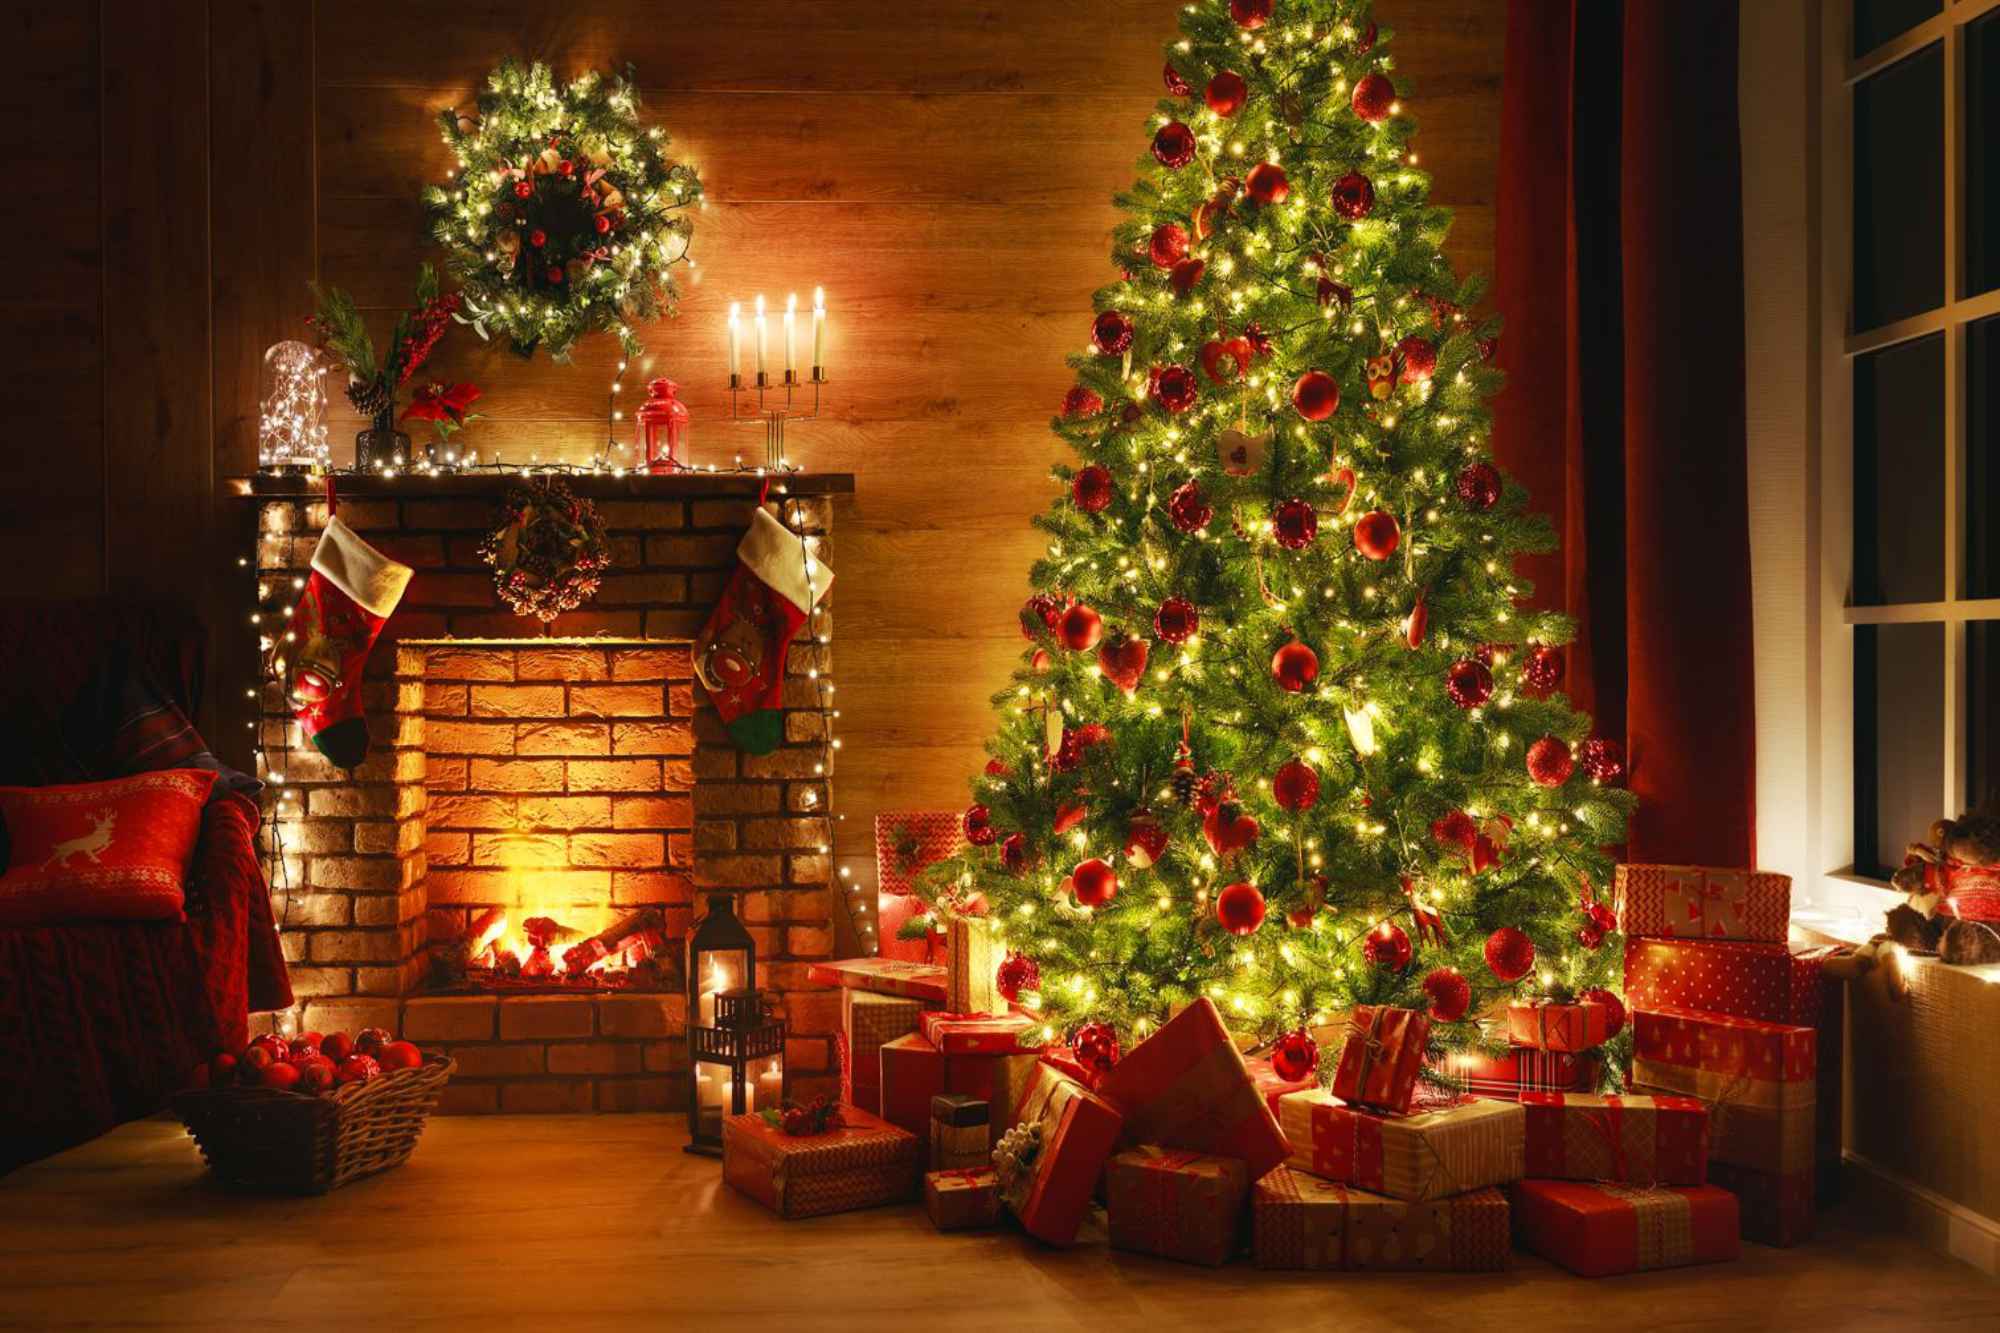 Christmas tree and decorations in a cosy living room